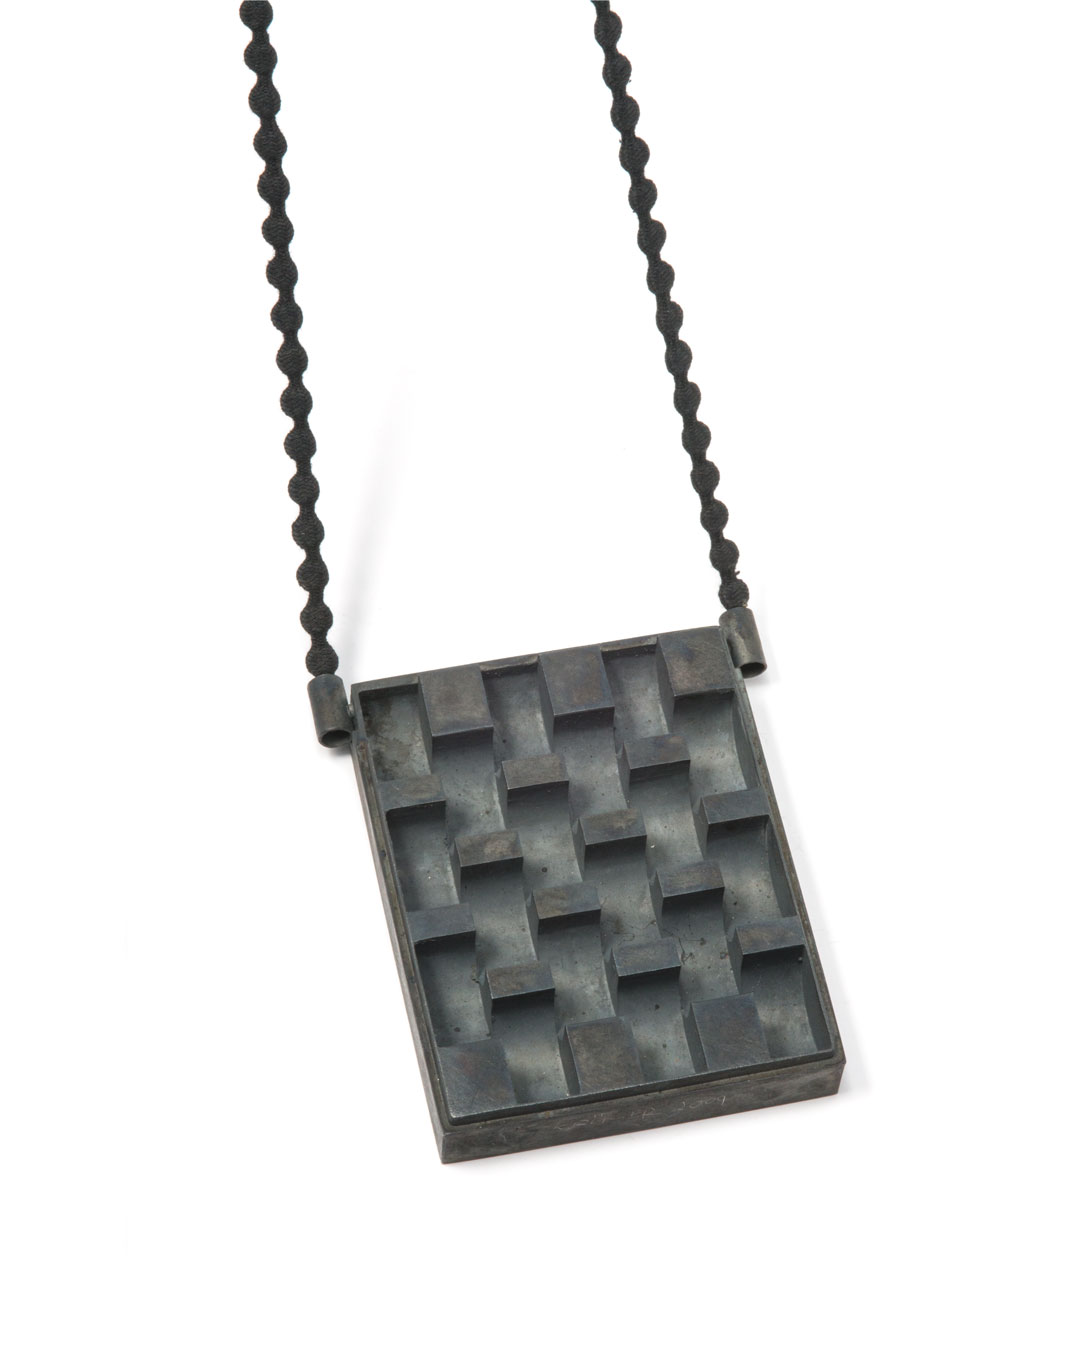 Winfried Krüger, untitled, 2009, necklace; oxidised silver, lead strapping, textile, element 80 x 100 mm, €2920